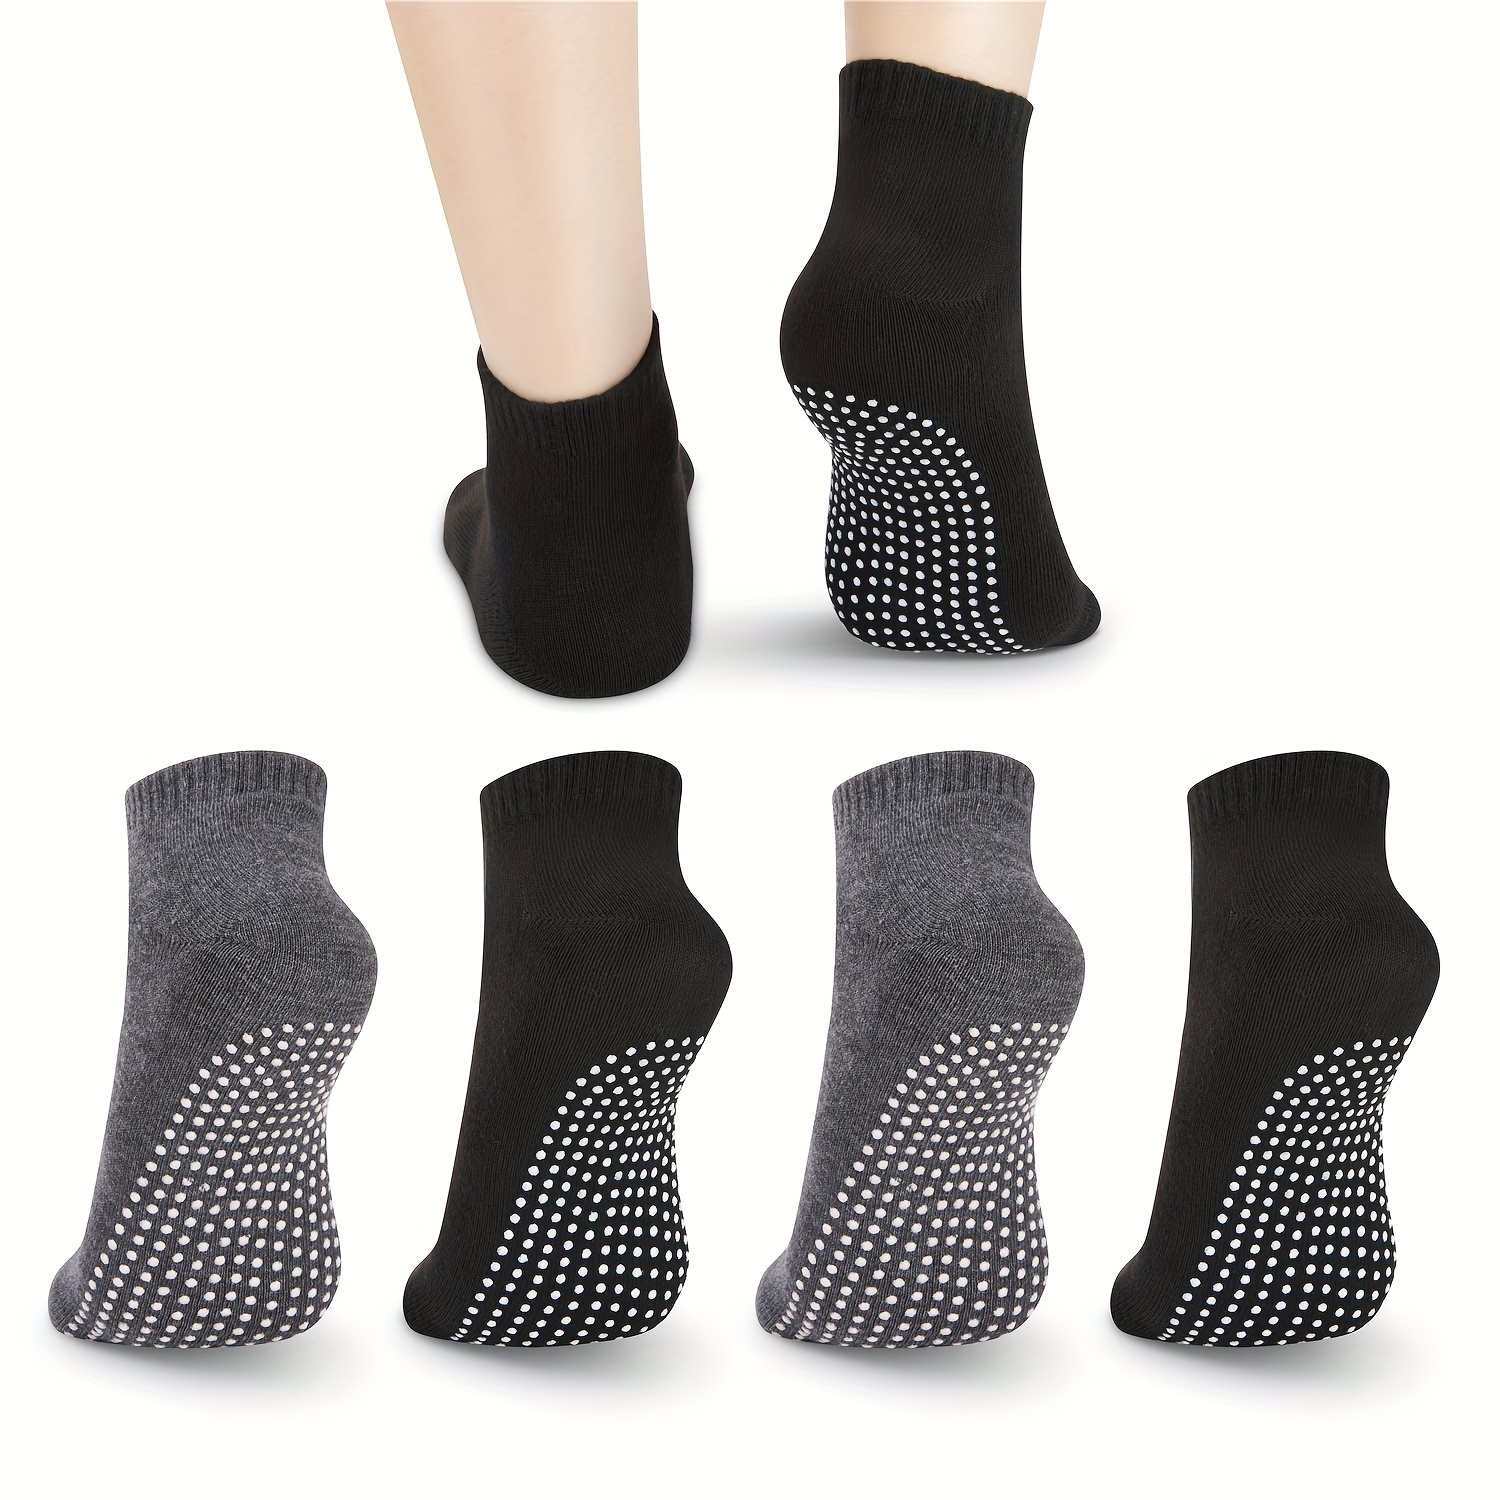 Deefly 3pairs/set Women's Non-slipping Socks With Grips, Ideal For Home,  Hospitalization, Pregnancy, Exercise And Yoga